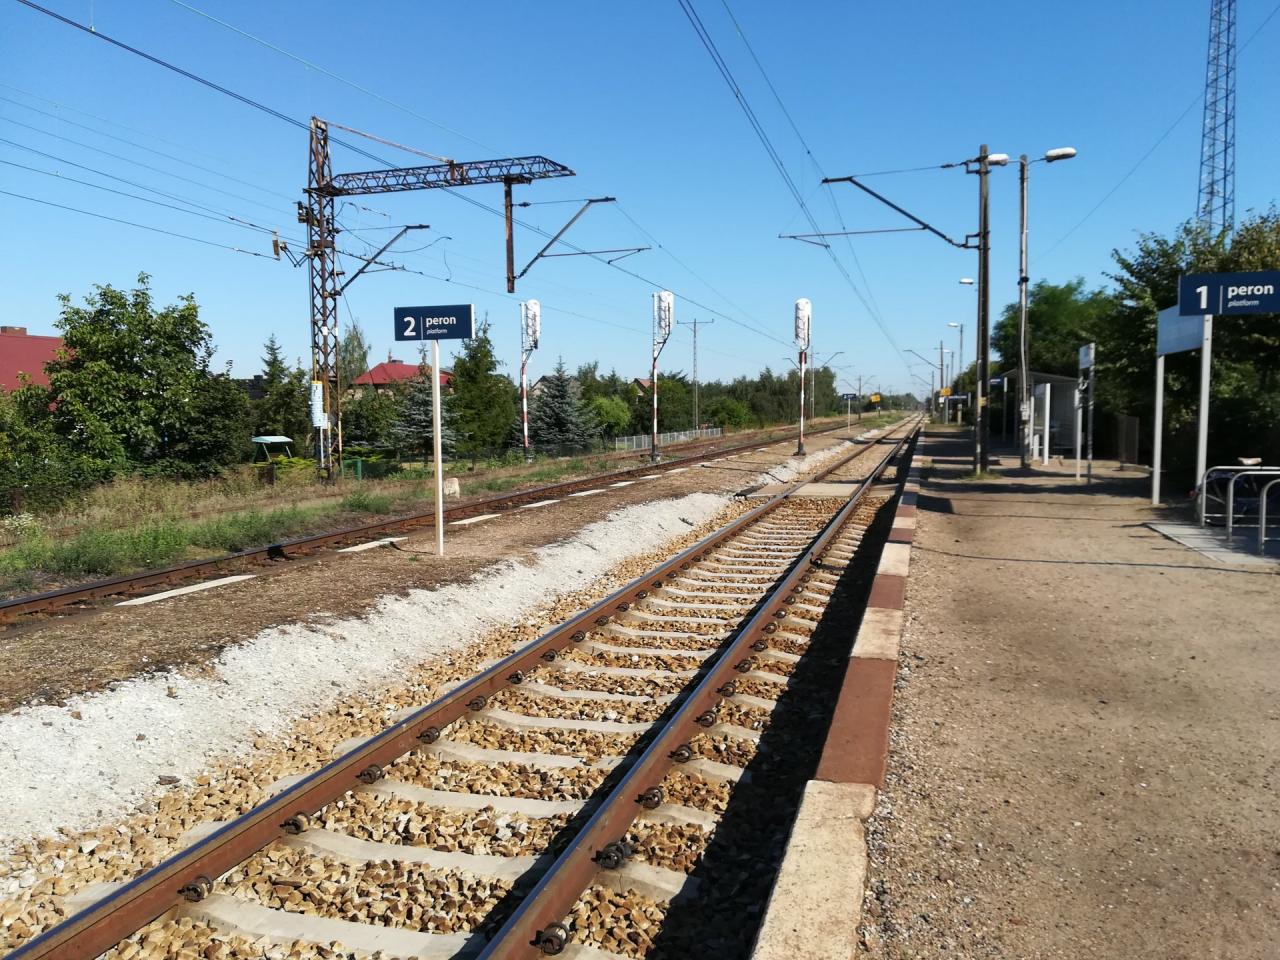 Another railway investment in Greater Poland.  It should be more convenient and safe